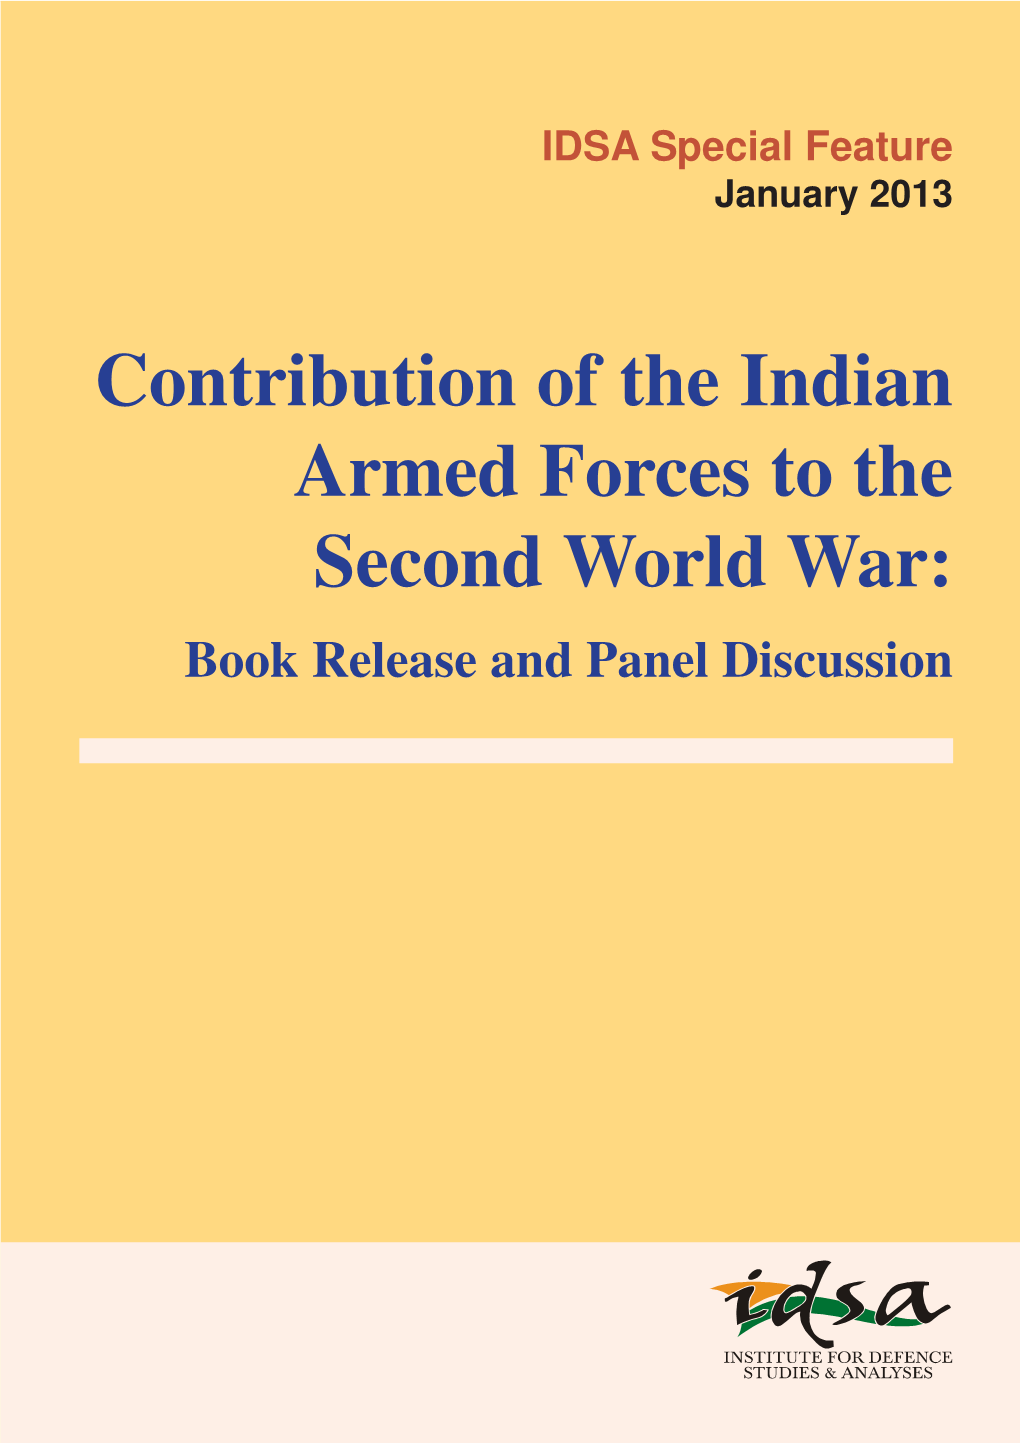 Contribution of the Indian Armed Forces to the Second World War: Book Release and Panel Discussion IDSA Special Feature 1